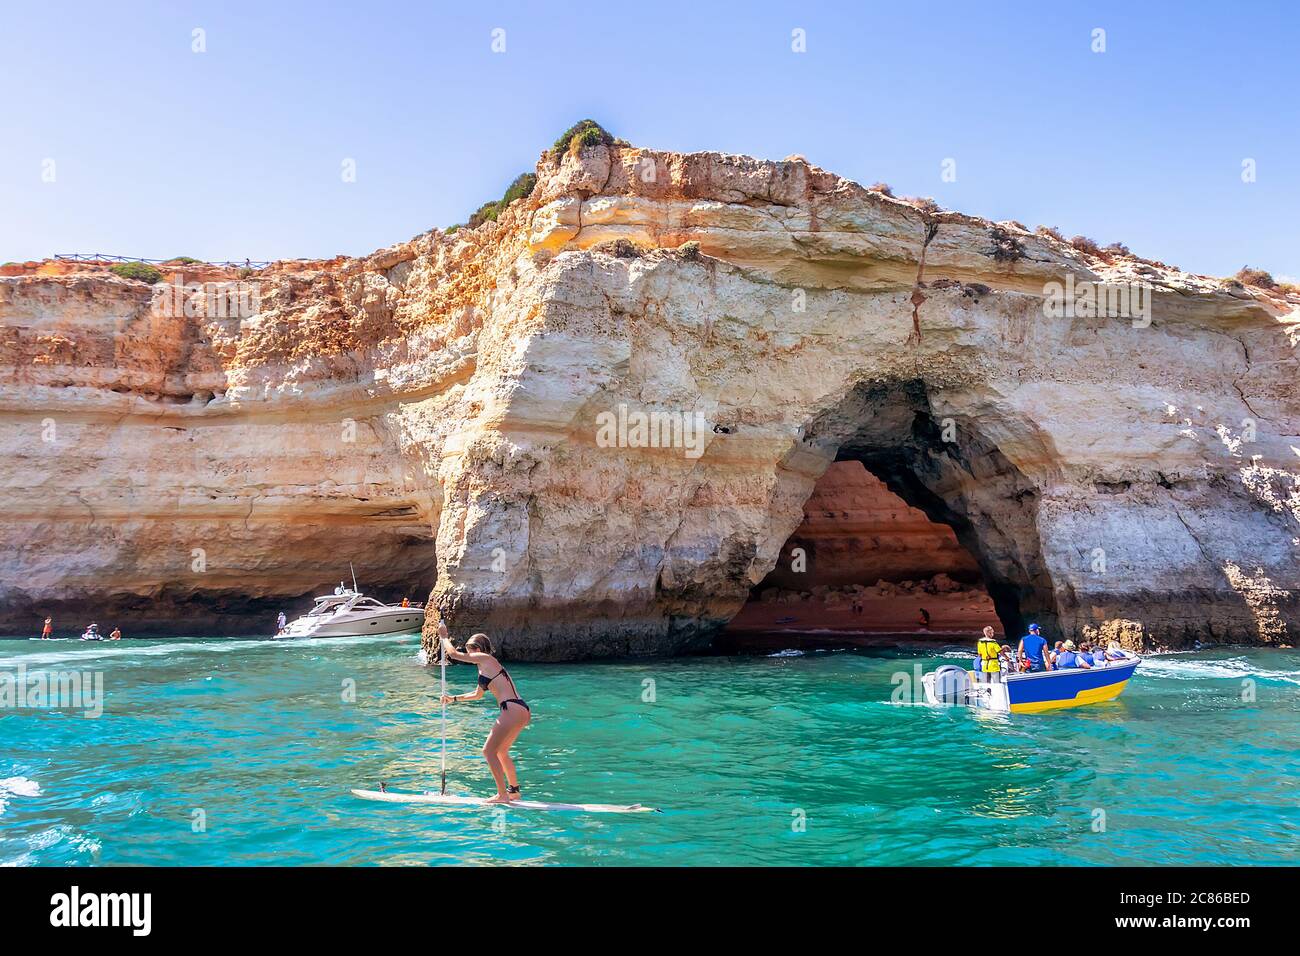 Boat Benagil Caves Tours. The most beautiful caves to visit in Algarve  kayak cave boat trip, sightseeing tours through the Benagil Caves on the  Algar Stock Photo - Alamy